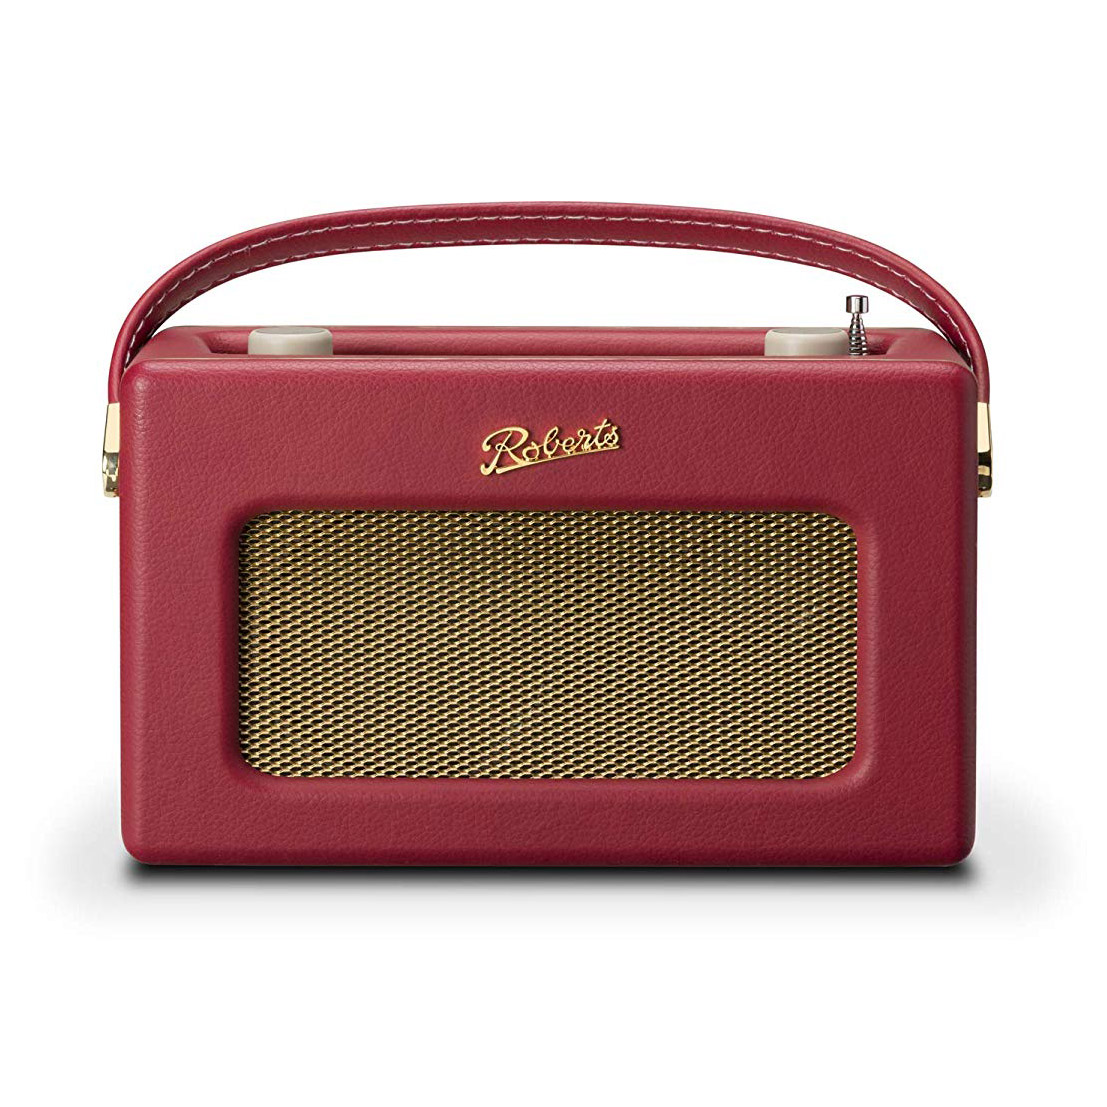 Image of Roberts ISTREAMLBR Revival Smart DAB FM Radio with Alexa in Berry Red